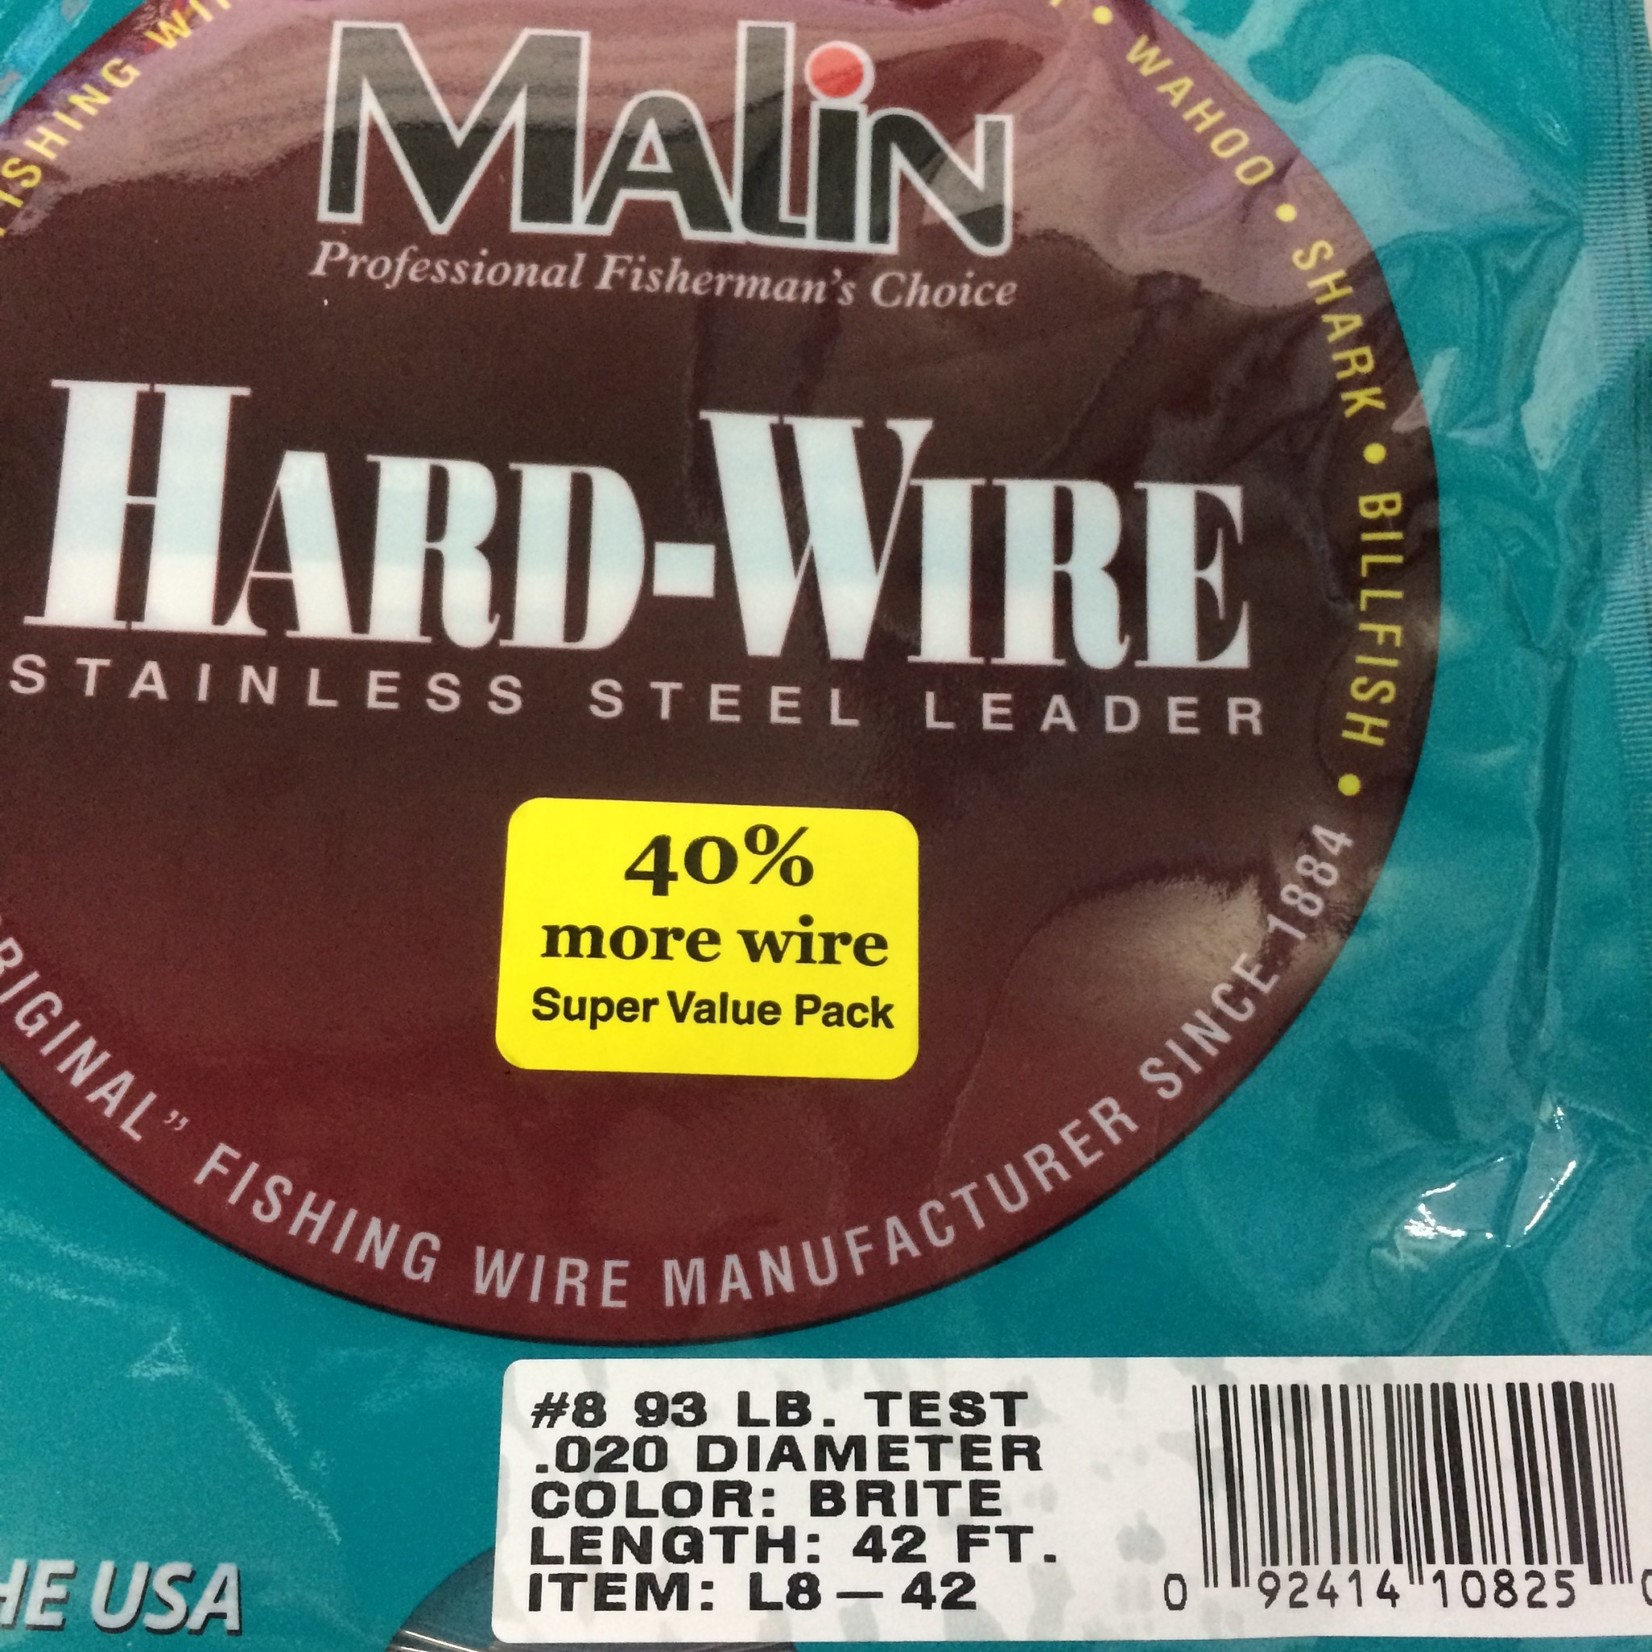 Malin Hardwire Stainless Steel Leader Wire | 42 Ft. Coil | Pick Line Test